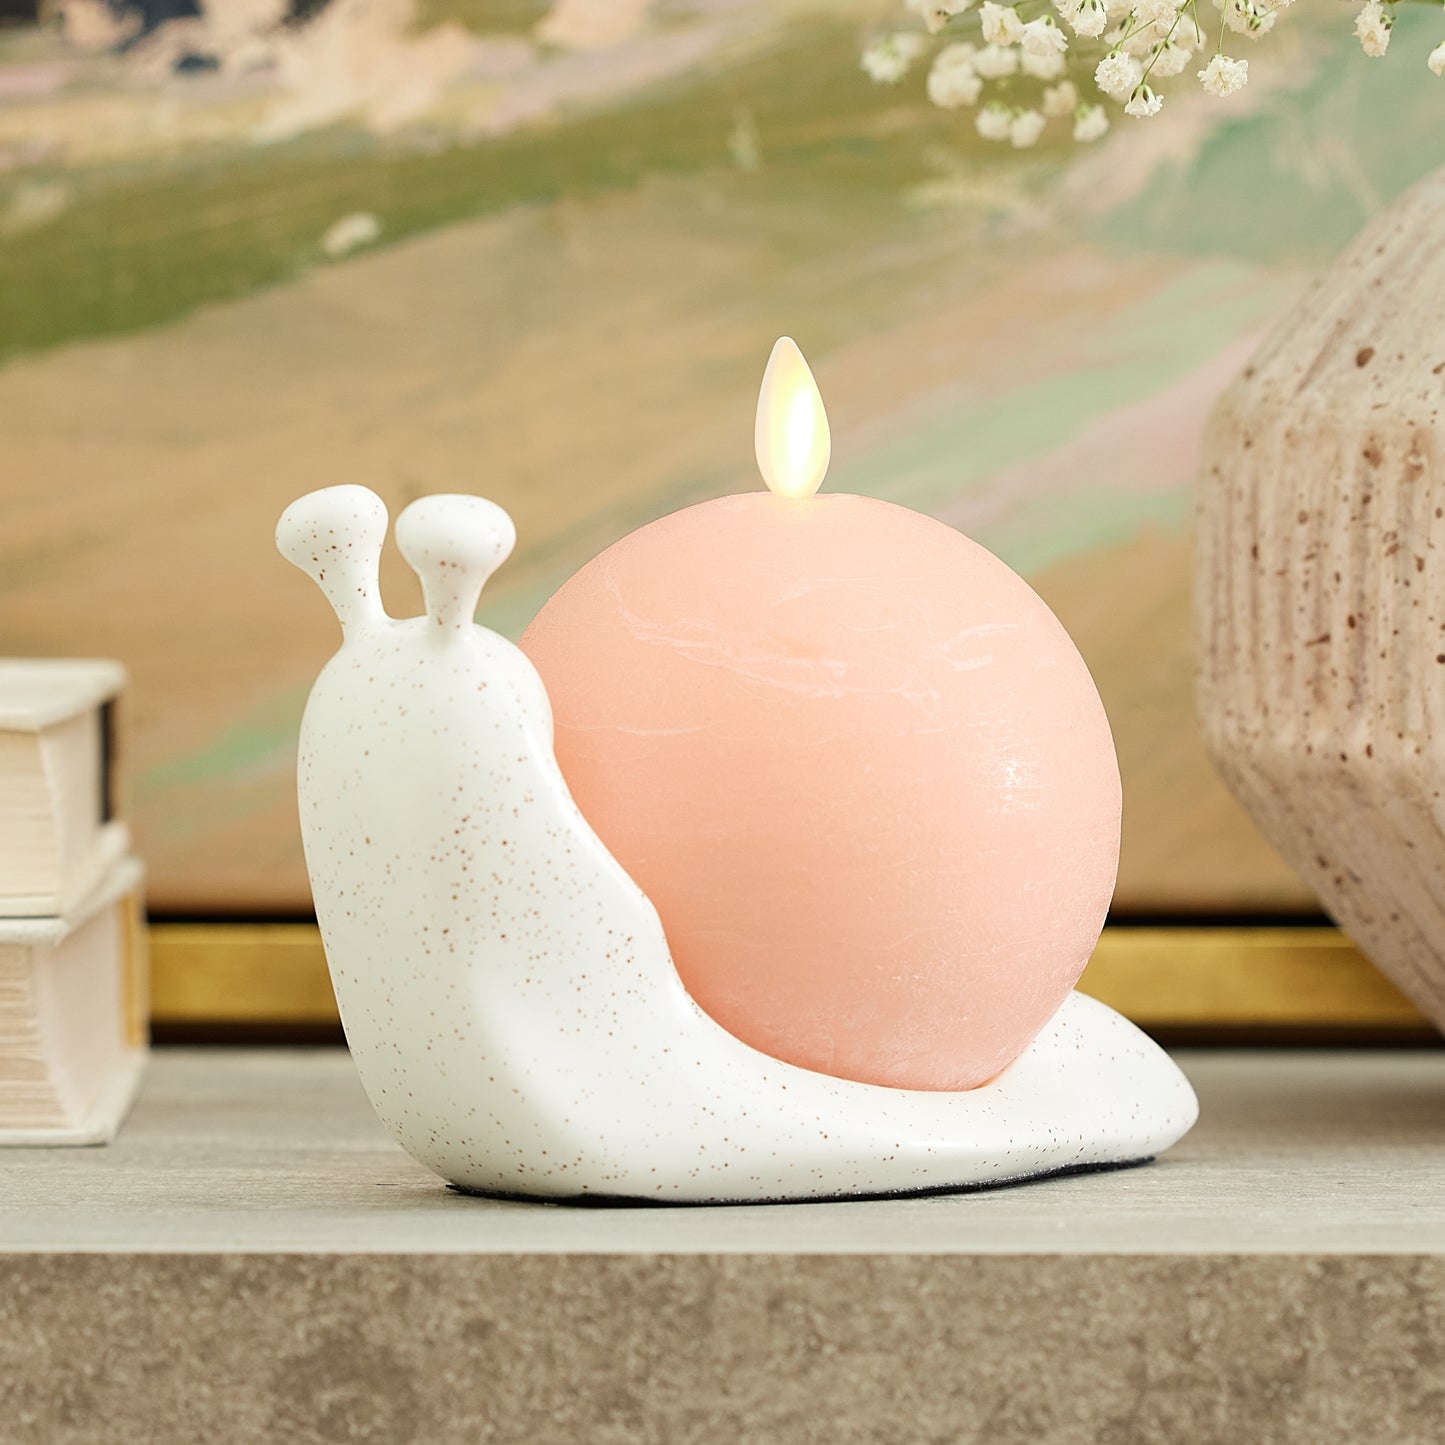 White Speckled Ceramic Snail Candle Holder for Spring Flameless Candle Spheres